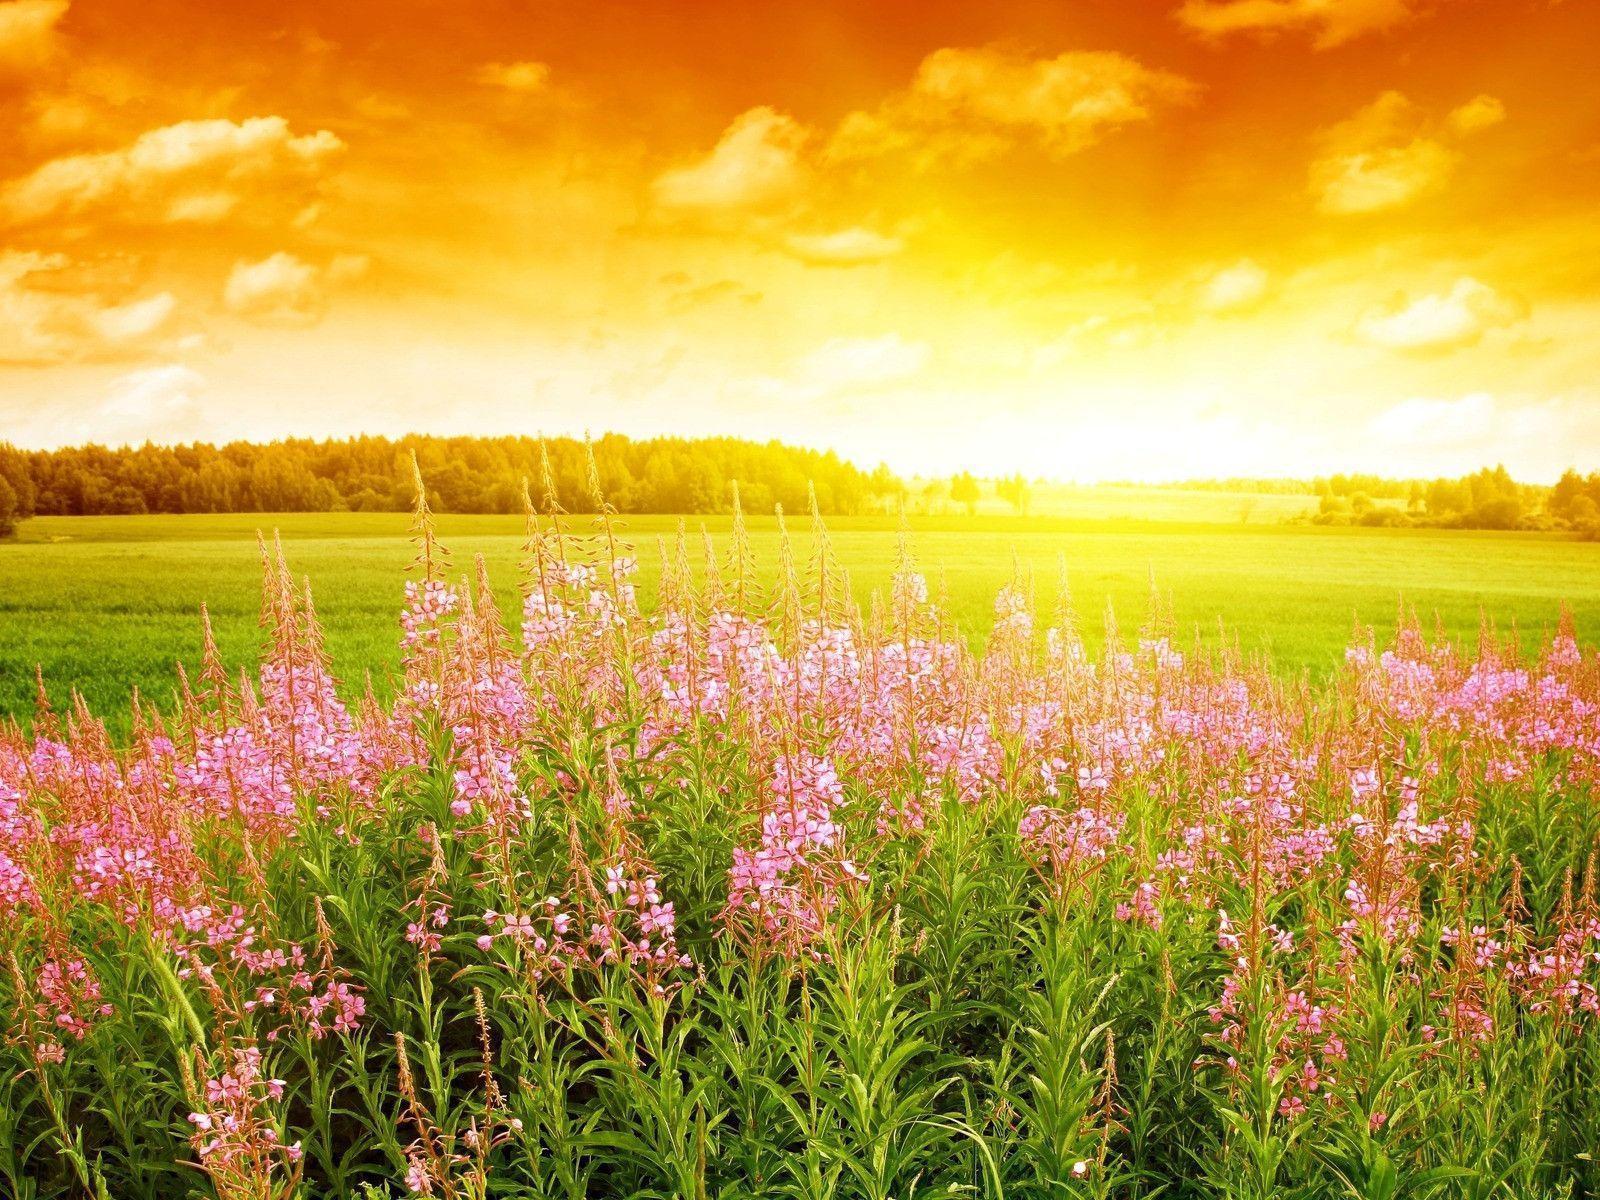 Summer Flowers Background Picture 5 HD Wallpaper. Hdimges